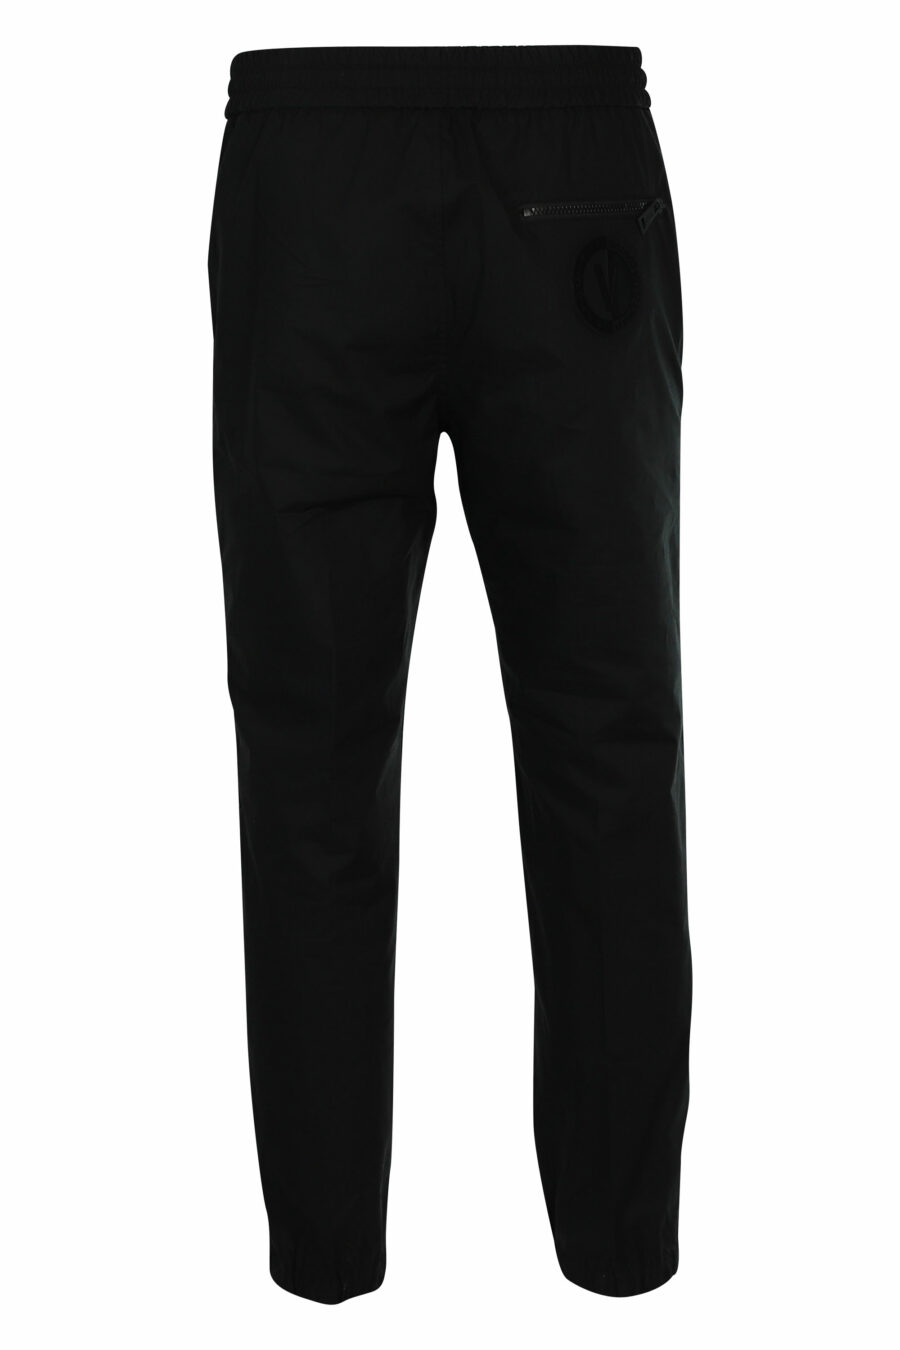 Black fishing trousers with logo - 8052019219876 3